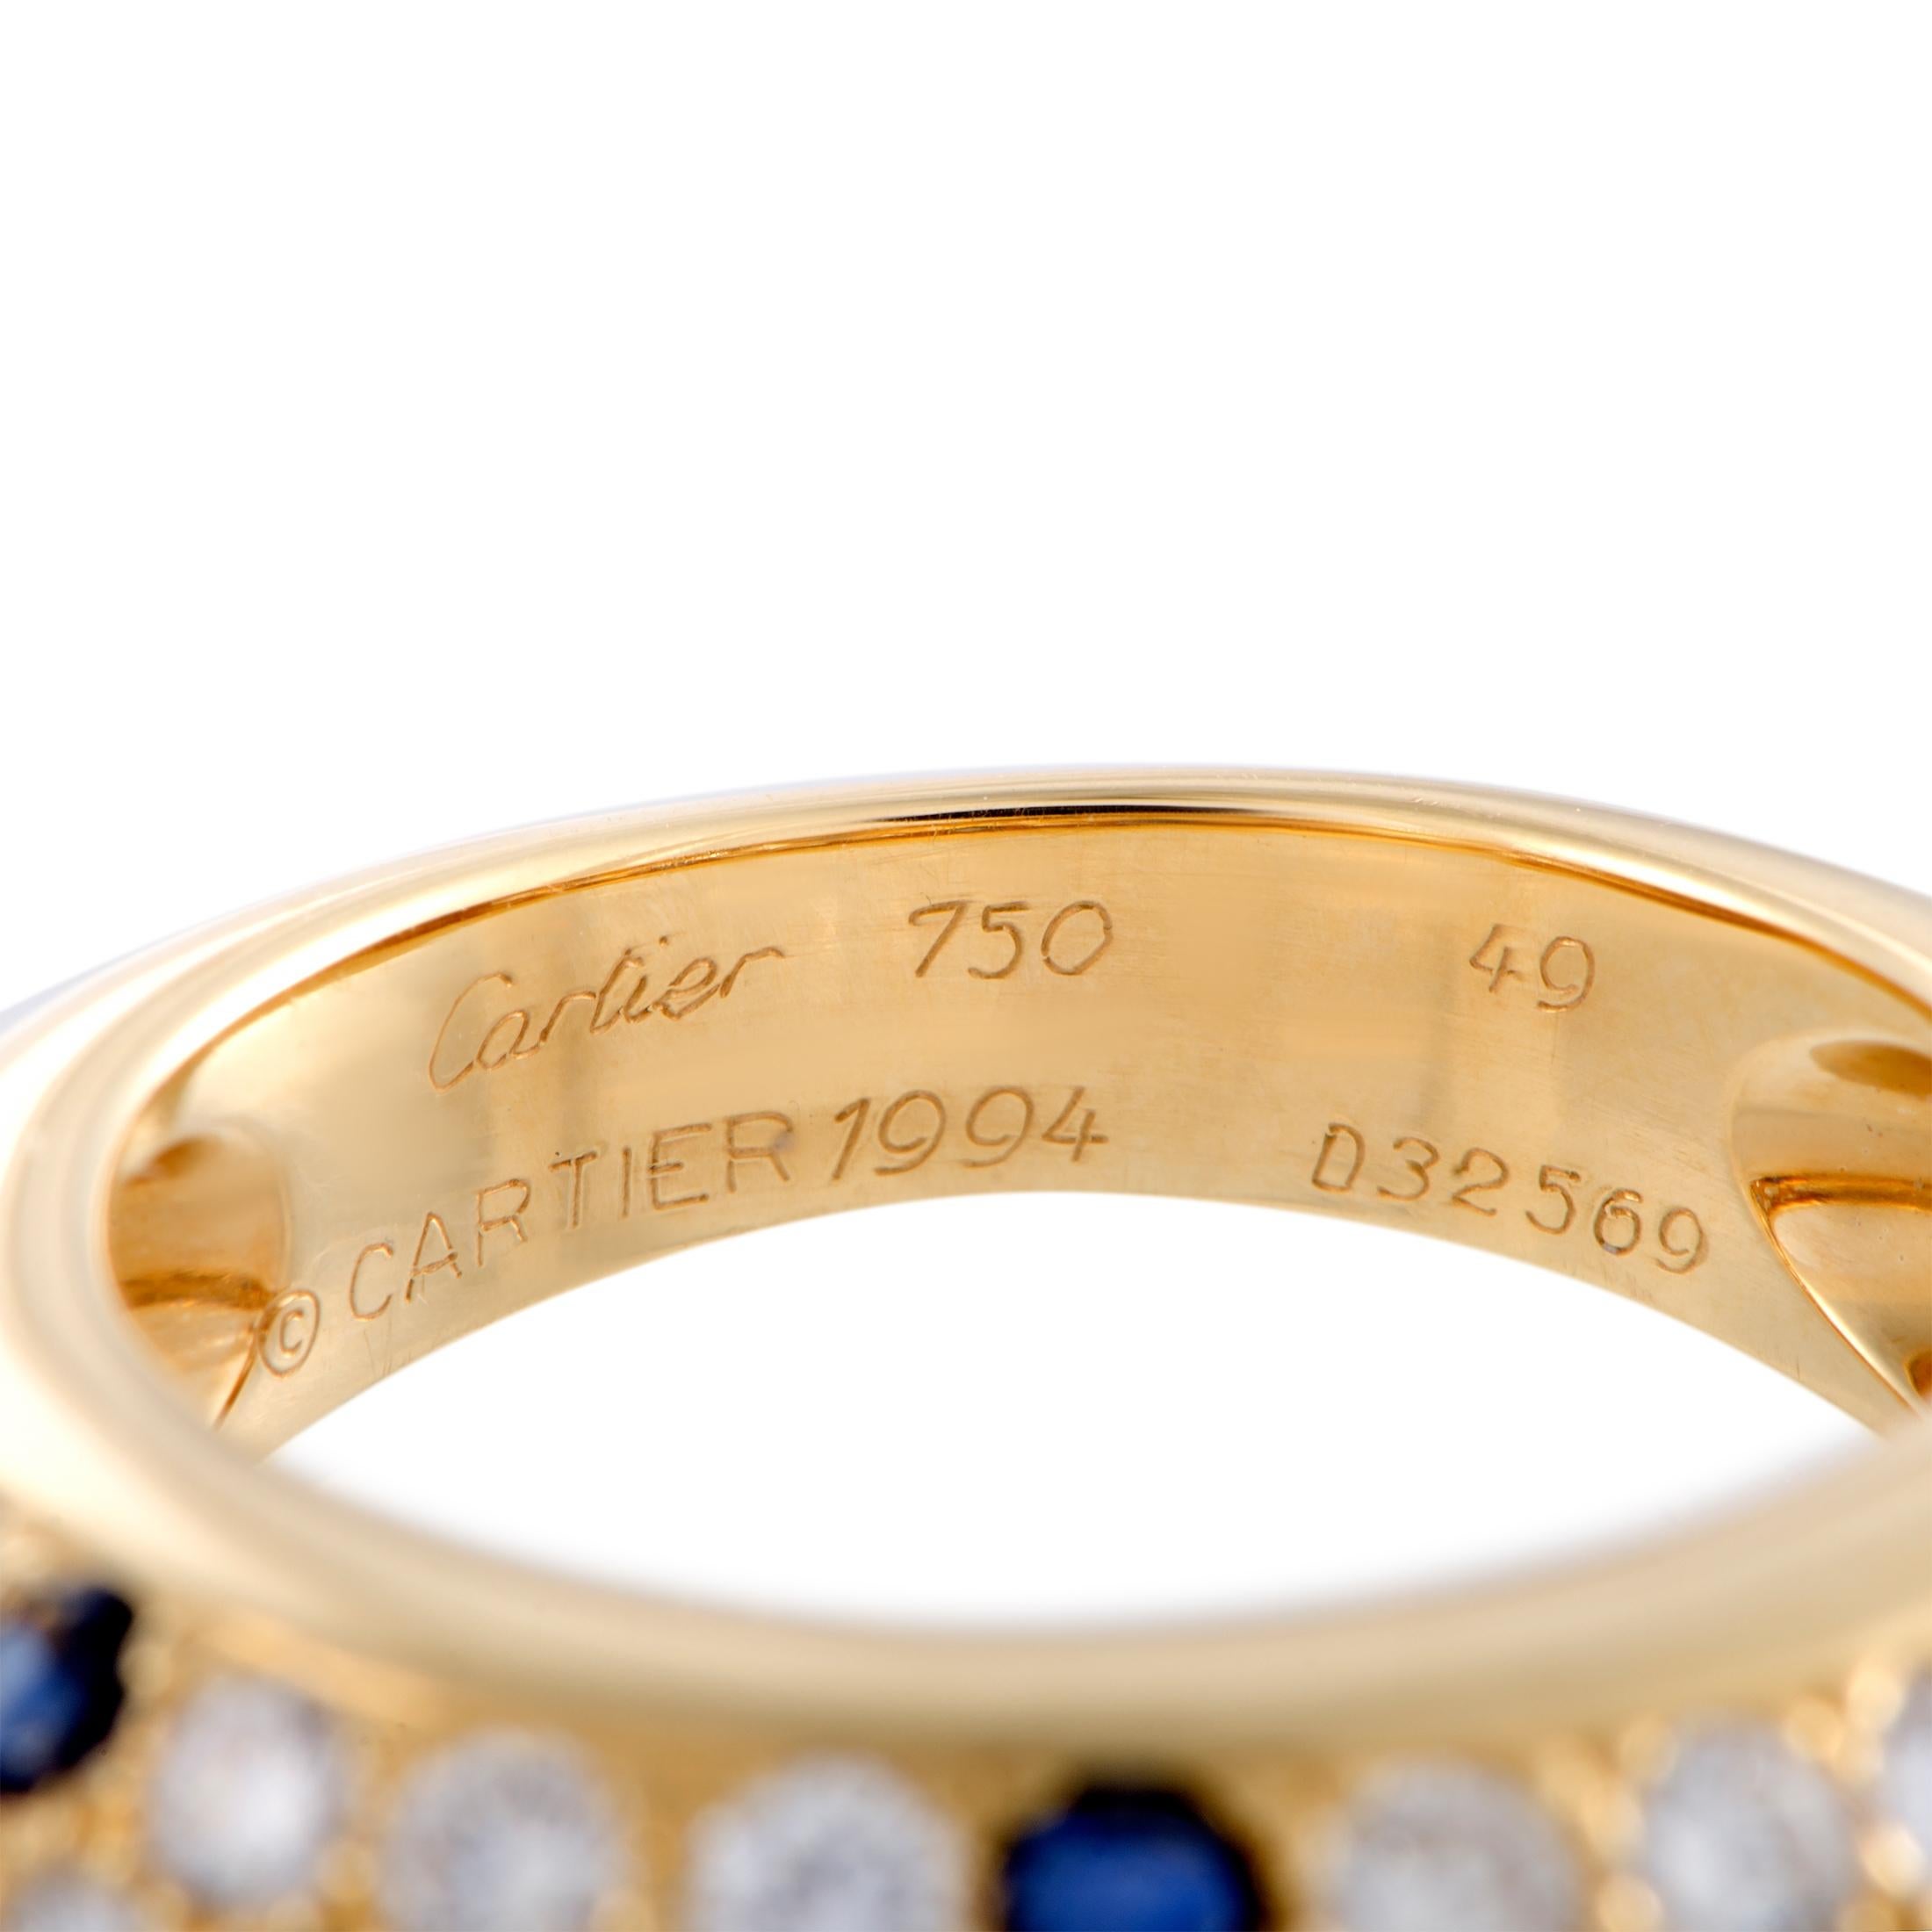 Women's Cartier Yellow Gold Diamond and Sapphire Pave Band Ring